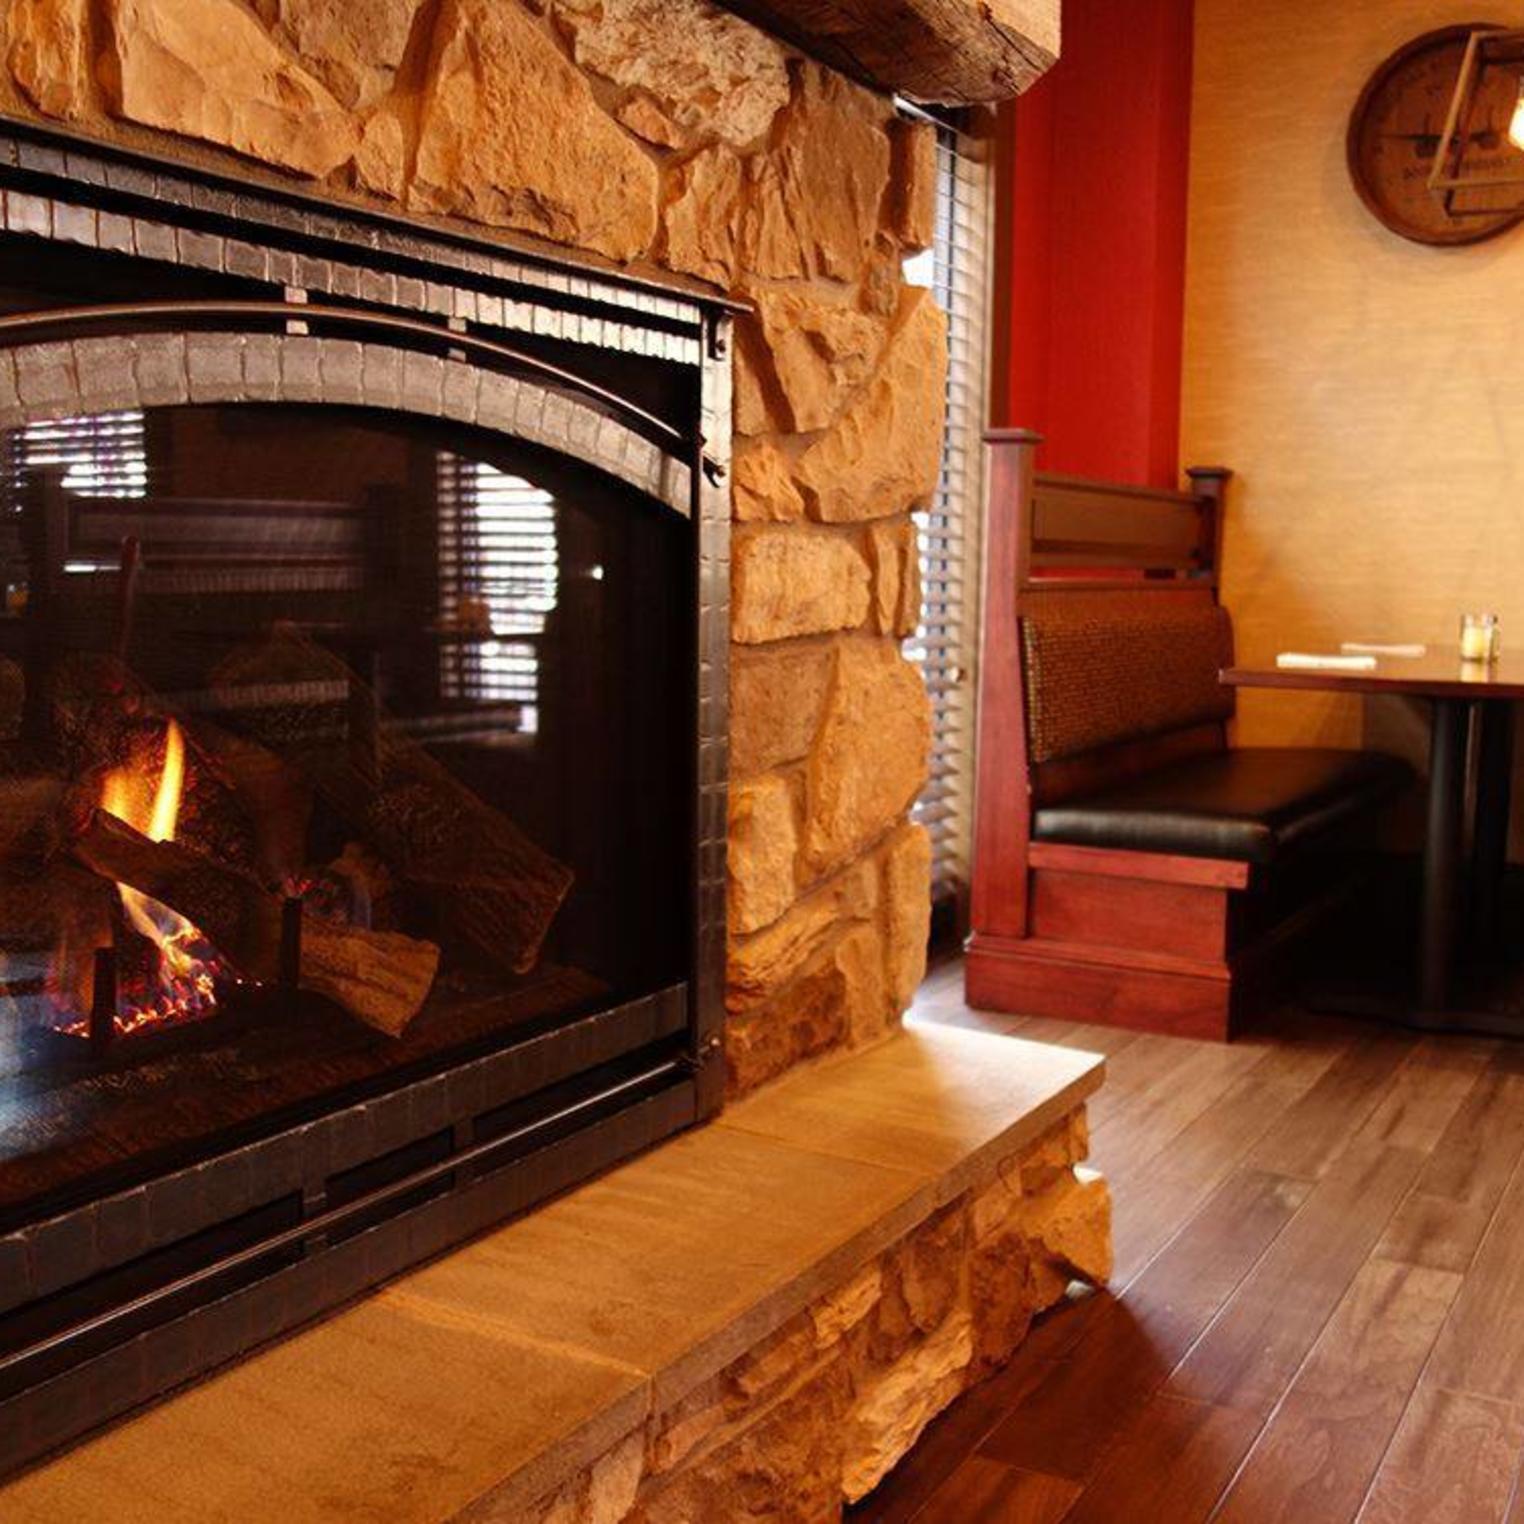 Our fireplace creates a cozy atmosphere for our guests.